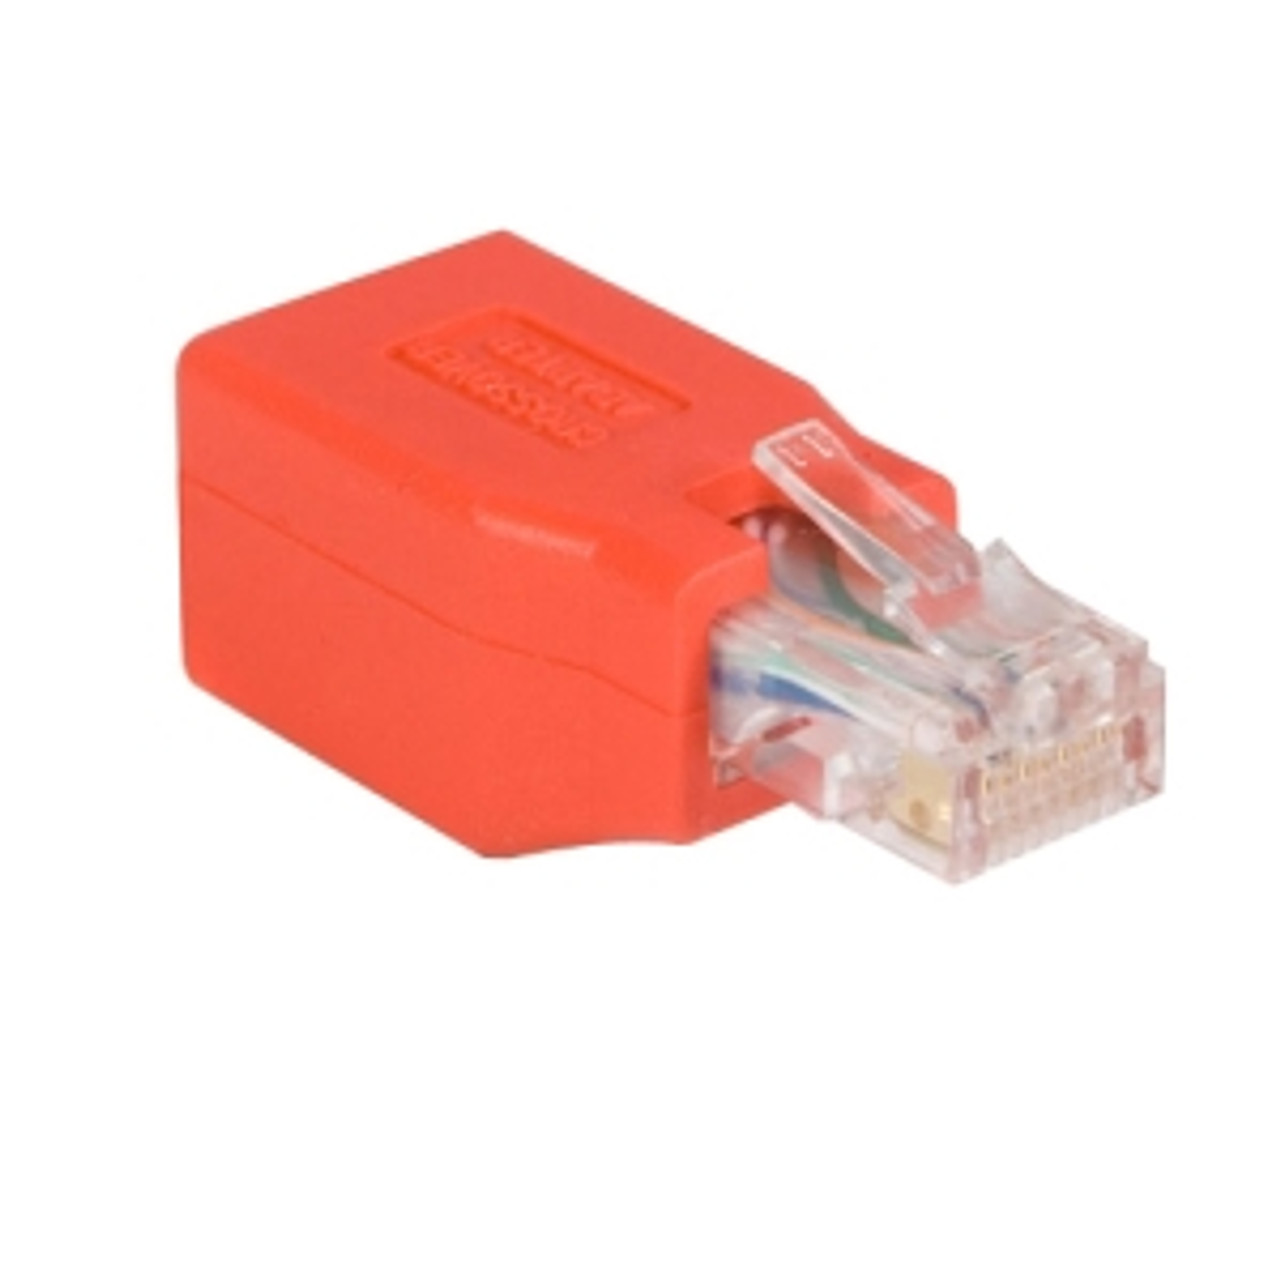 C6CROSSOVER StarTech Gigabit Cat-6 to Crossover Ethernet Adapter (Red)